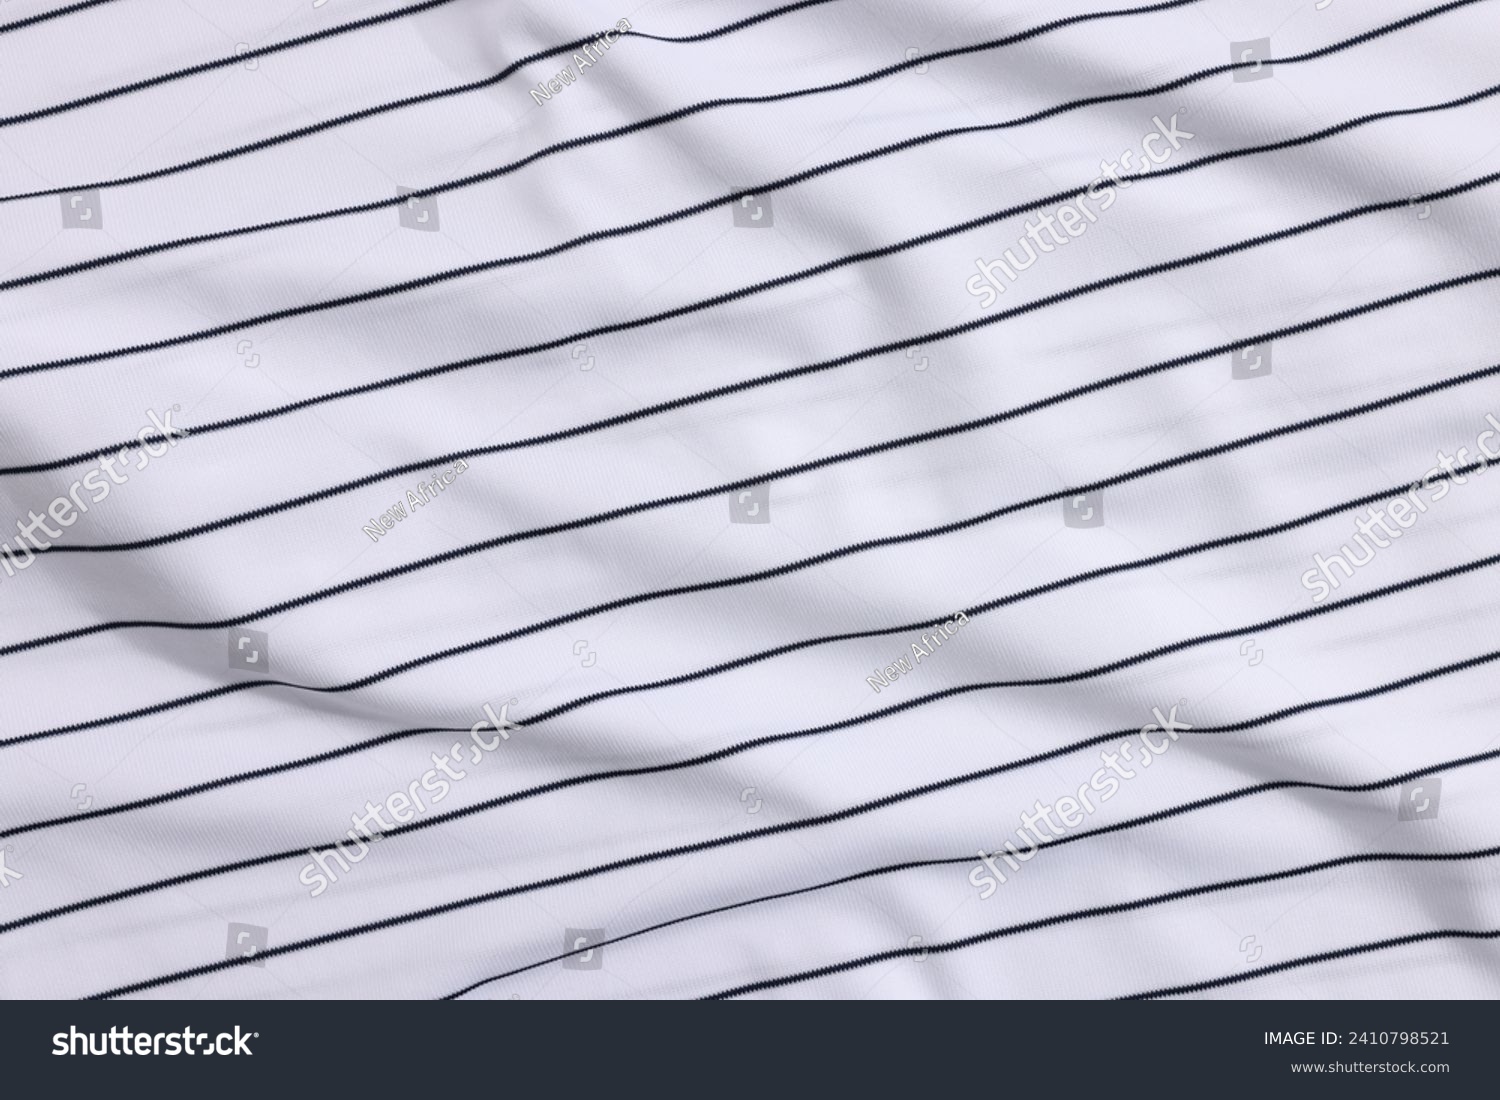 Striped baseball uniform as background, top view #2410798521